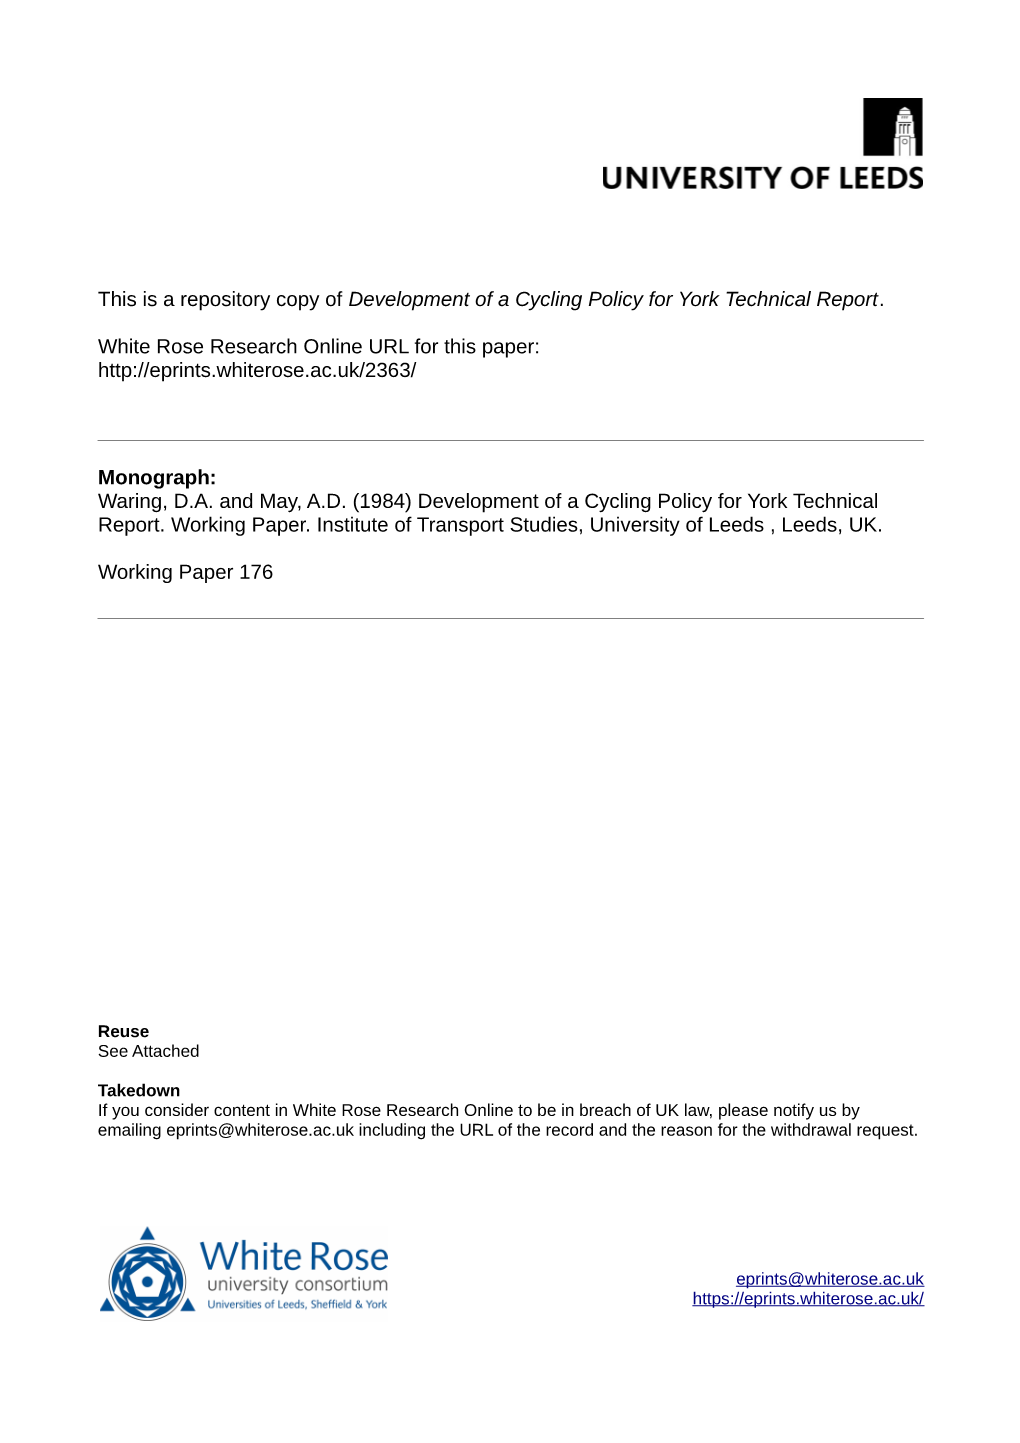 Development of a Cycling Policy for York Technical Report